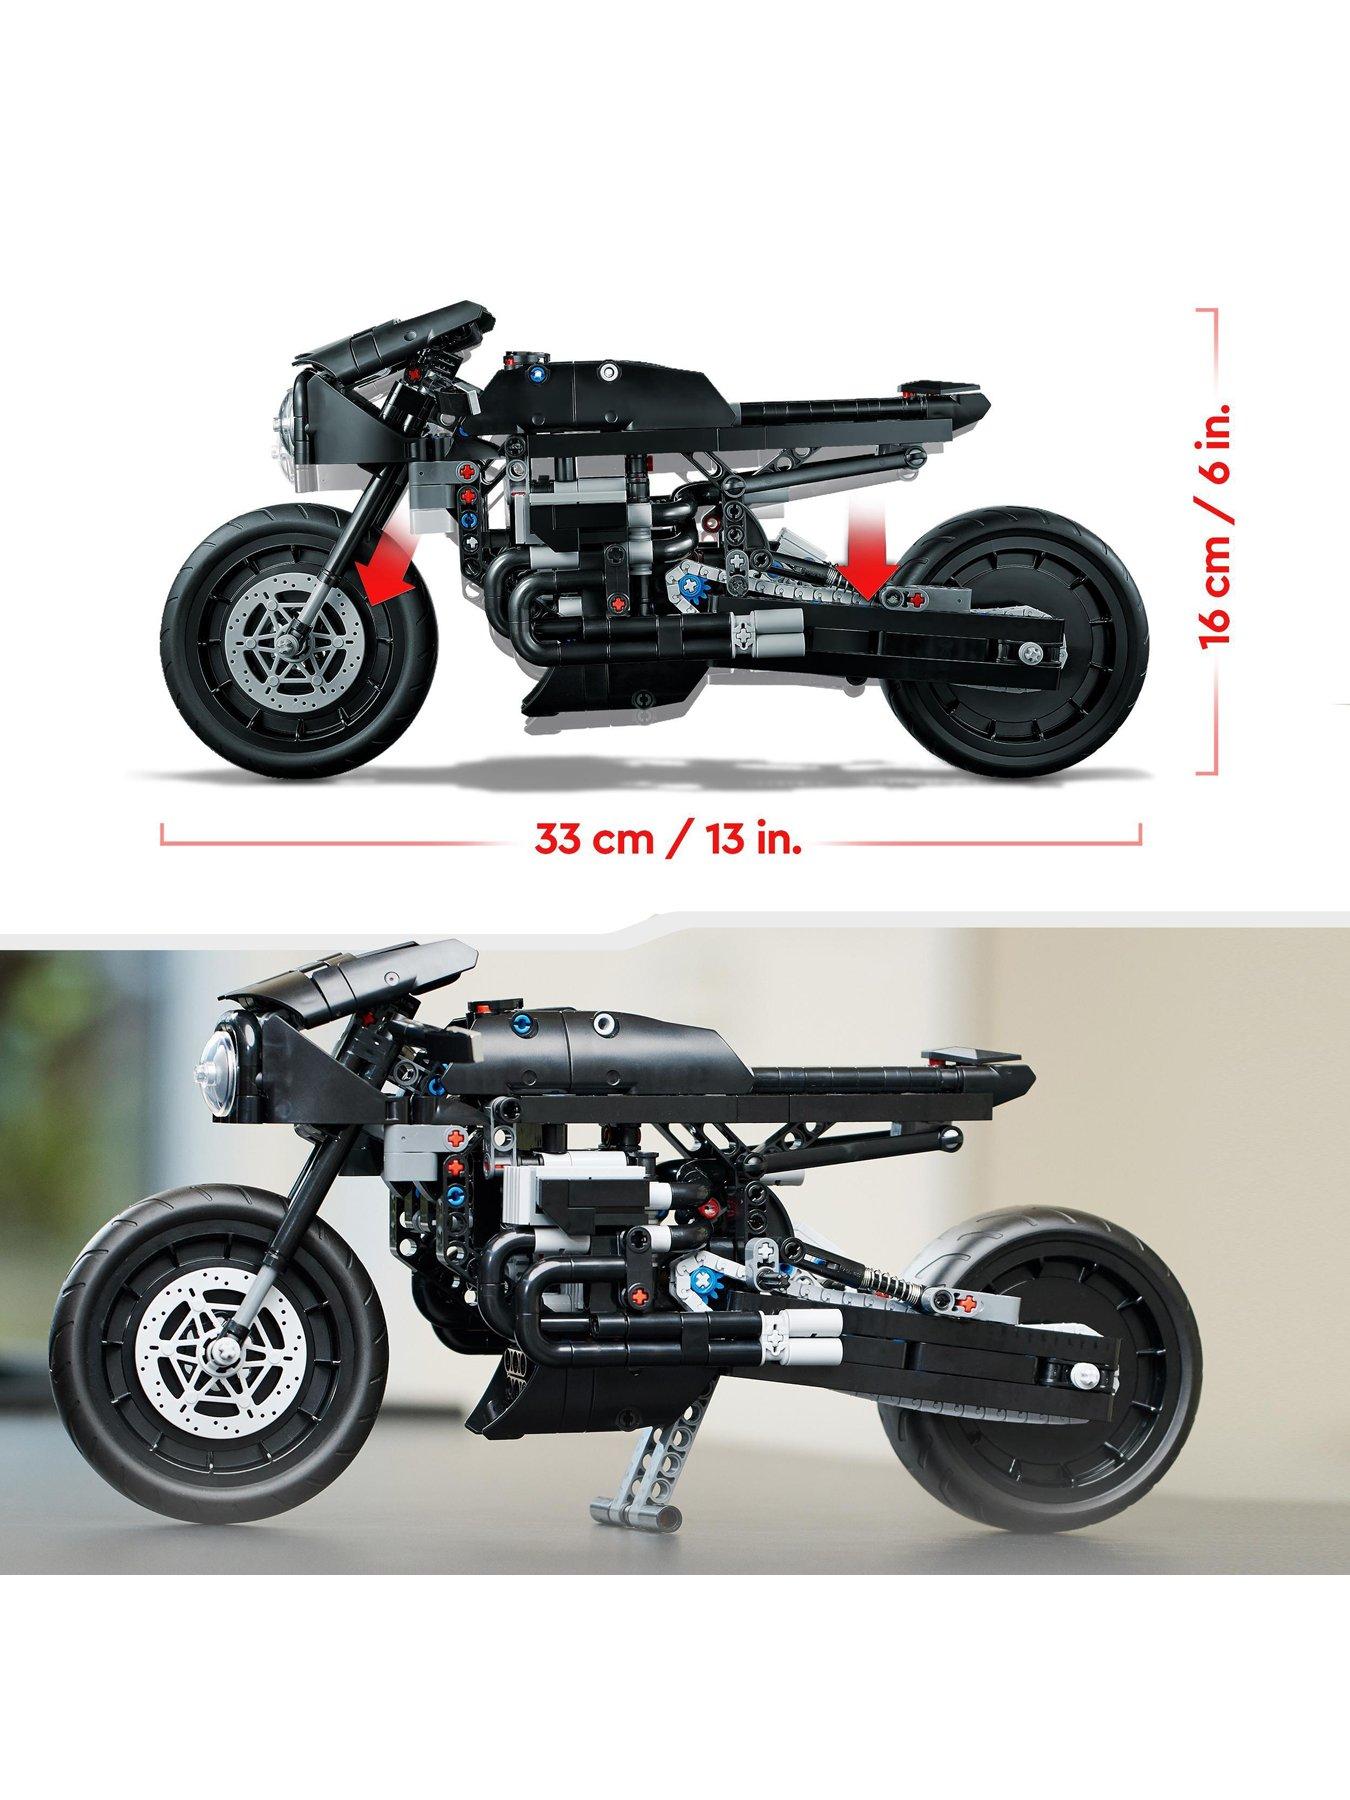 LEGO Technic THE BATMAN – BATCYCLE Set 42155, Collectible Toy Motorcycle,  Scale Model Building Kit of the Iconic Super Hero Bike from 2022 Movie 